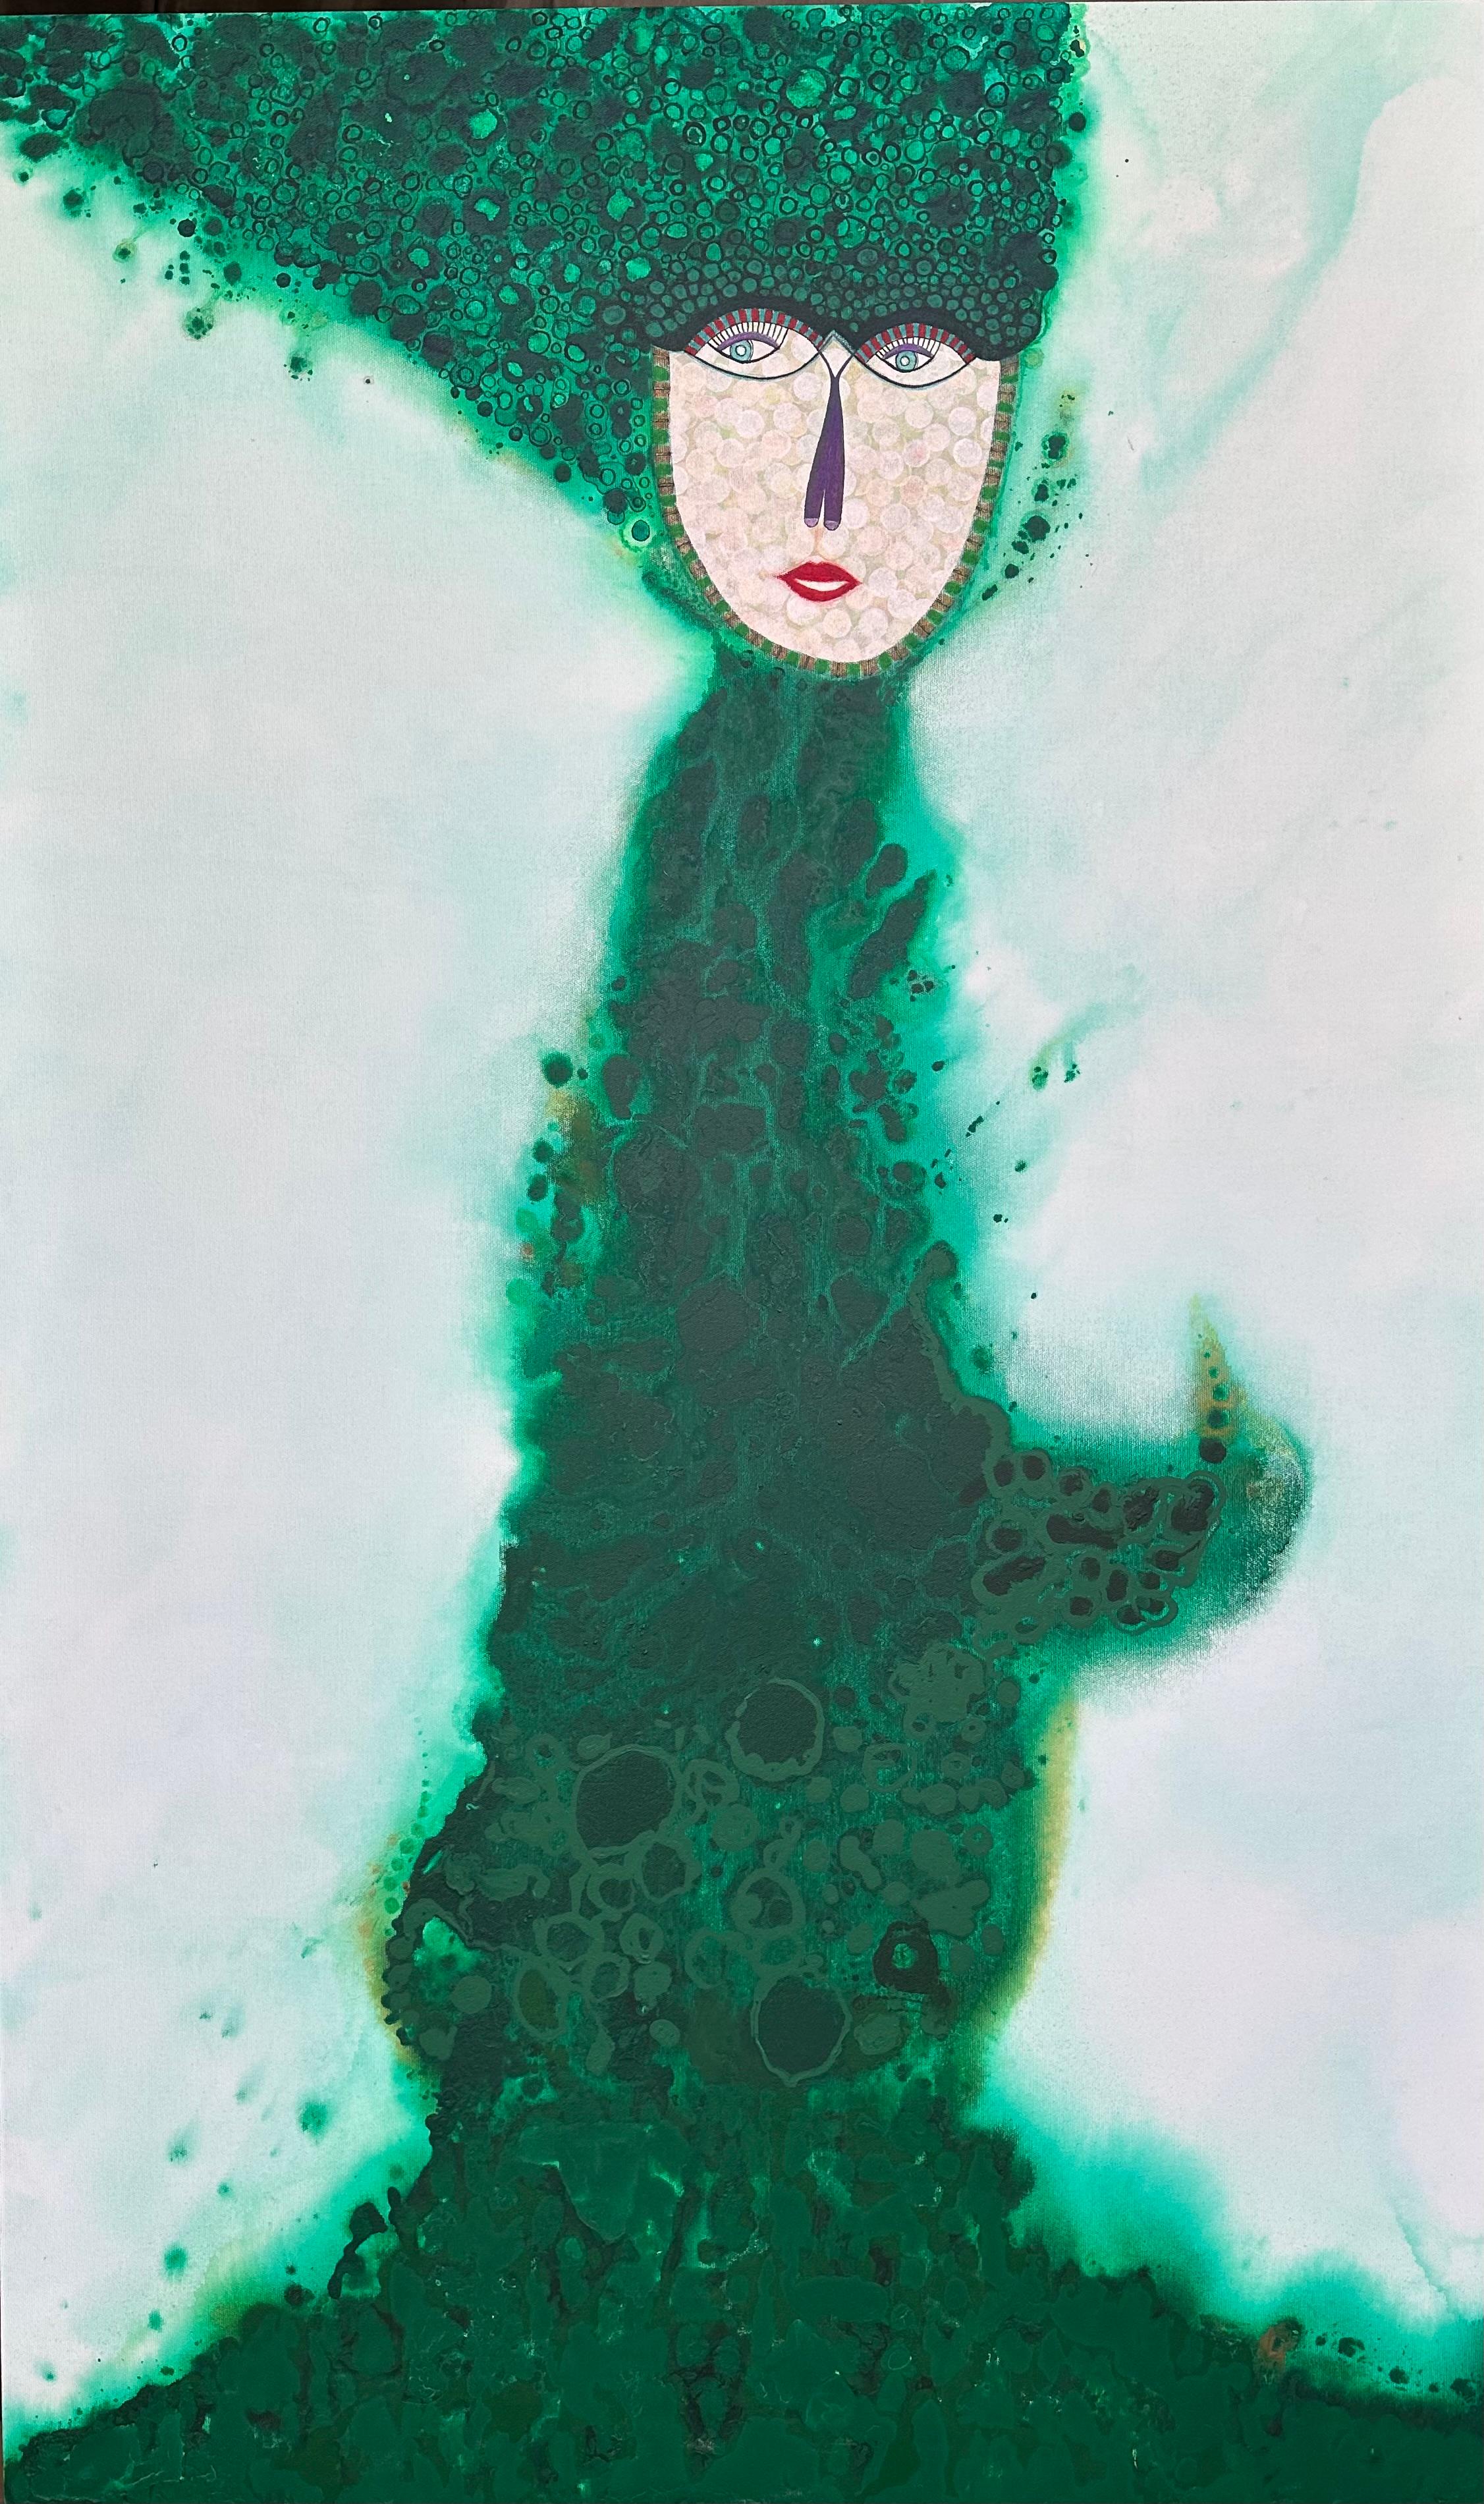 Figurative Vibrant Emerald Green Female Portrait - Large Format Contemporary Cuban Art.

This piece is unique and comes with a signed certificate of Authenticity by the artist.

Despite international acclaim as one Cuba’s foremost living artists,